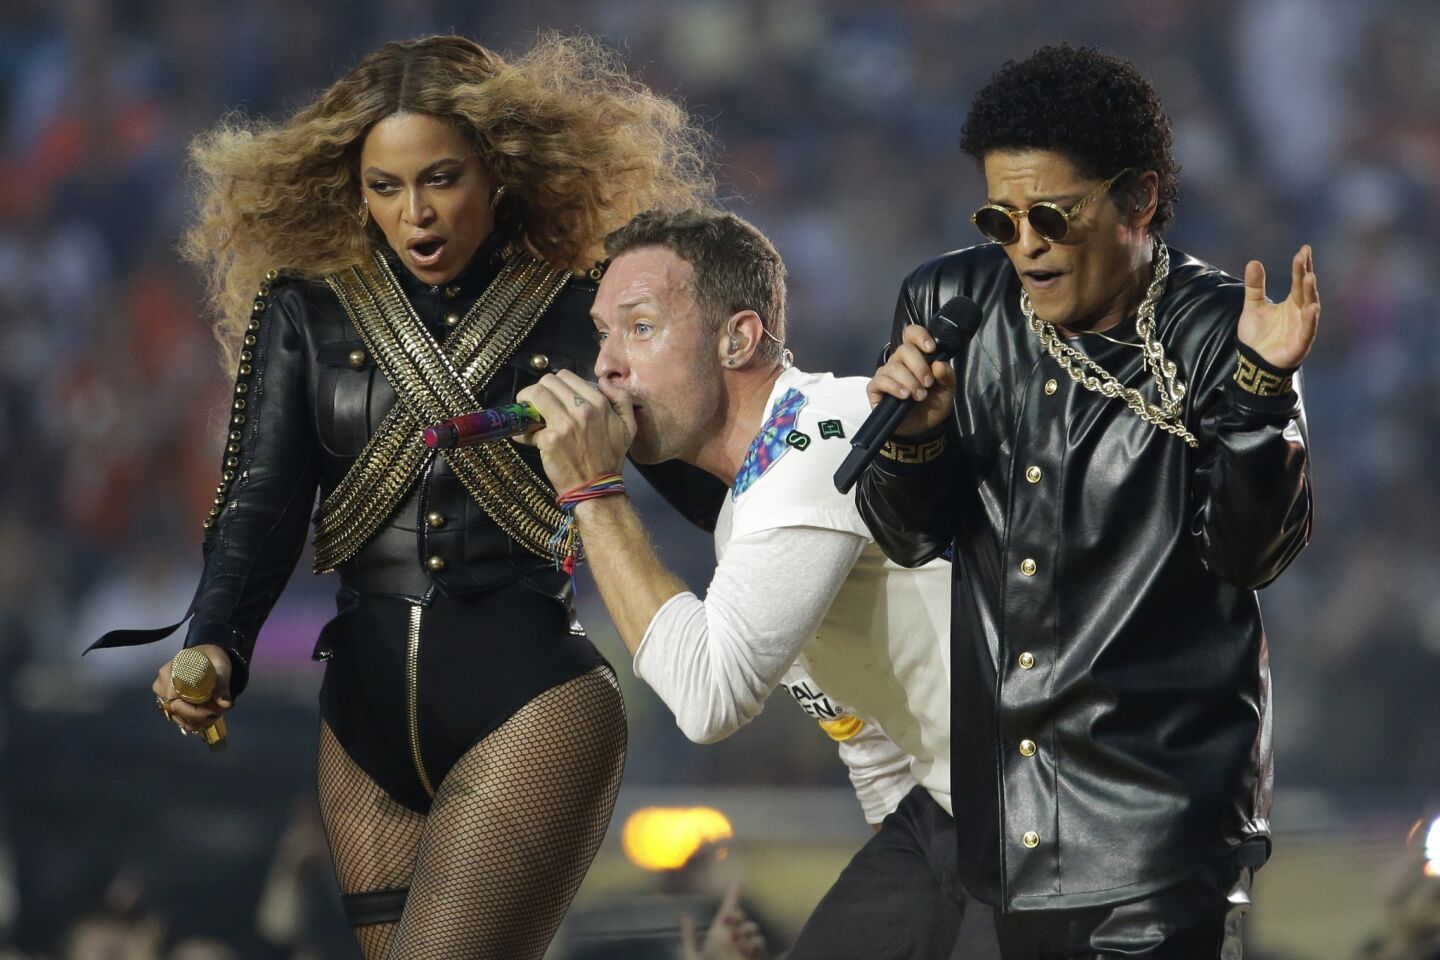 Coldplay featuring Beyonce and Bruno Mars | 2016